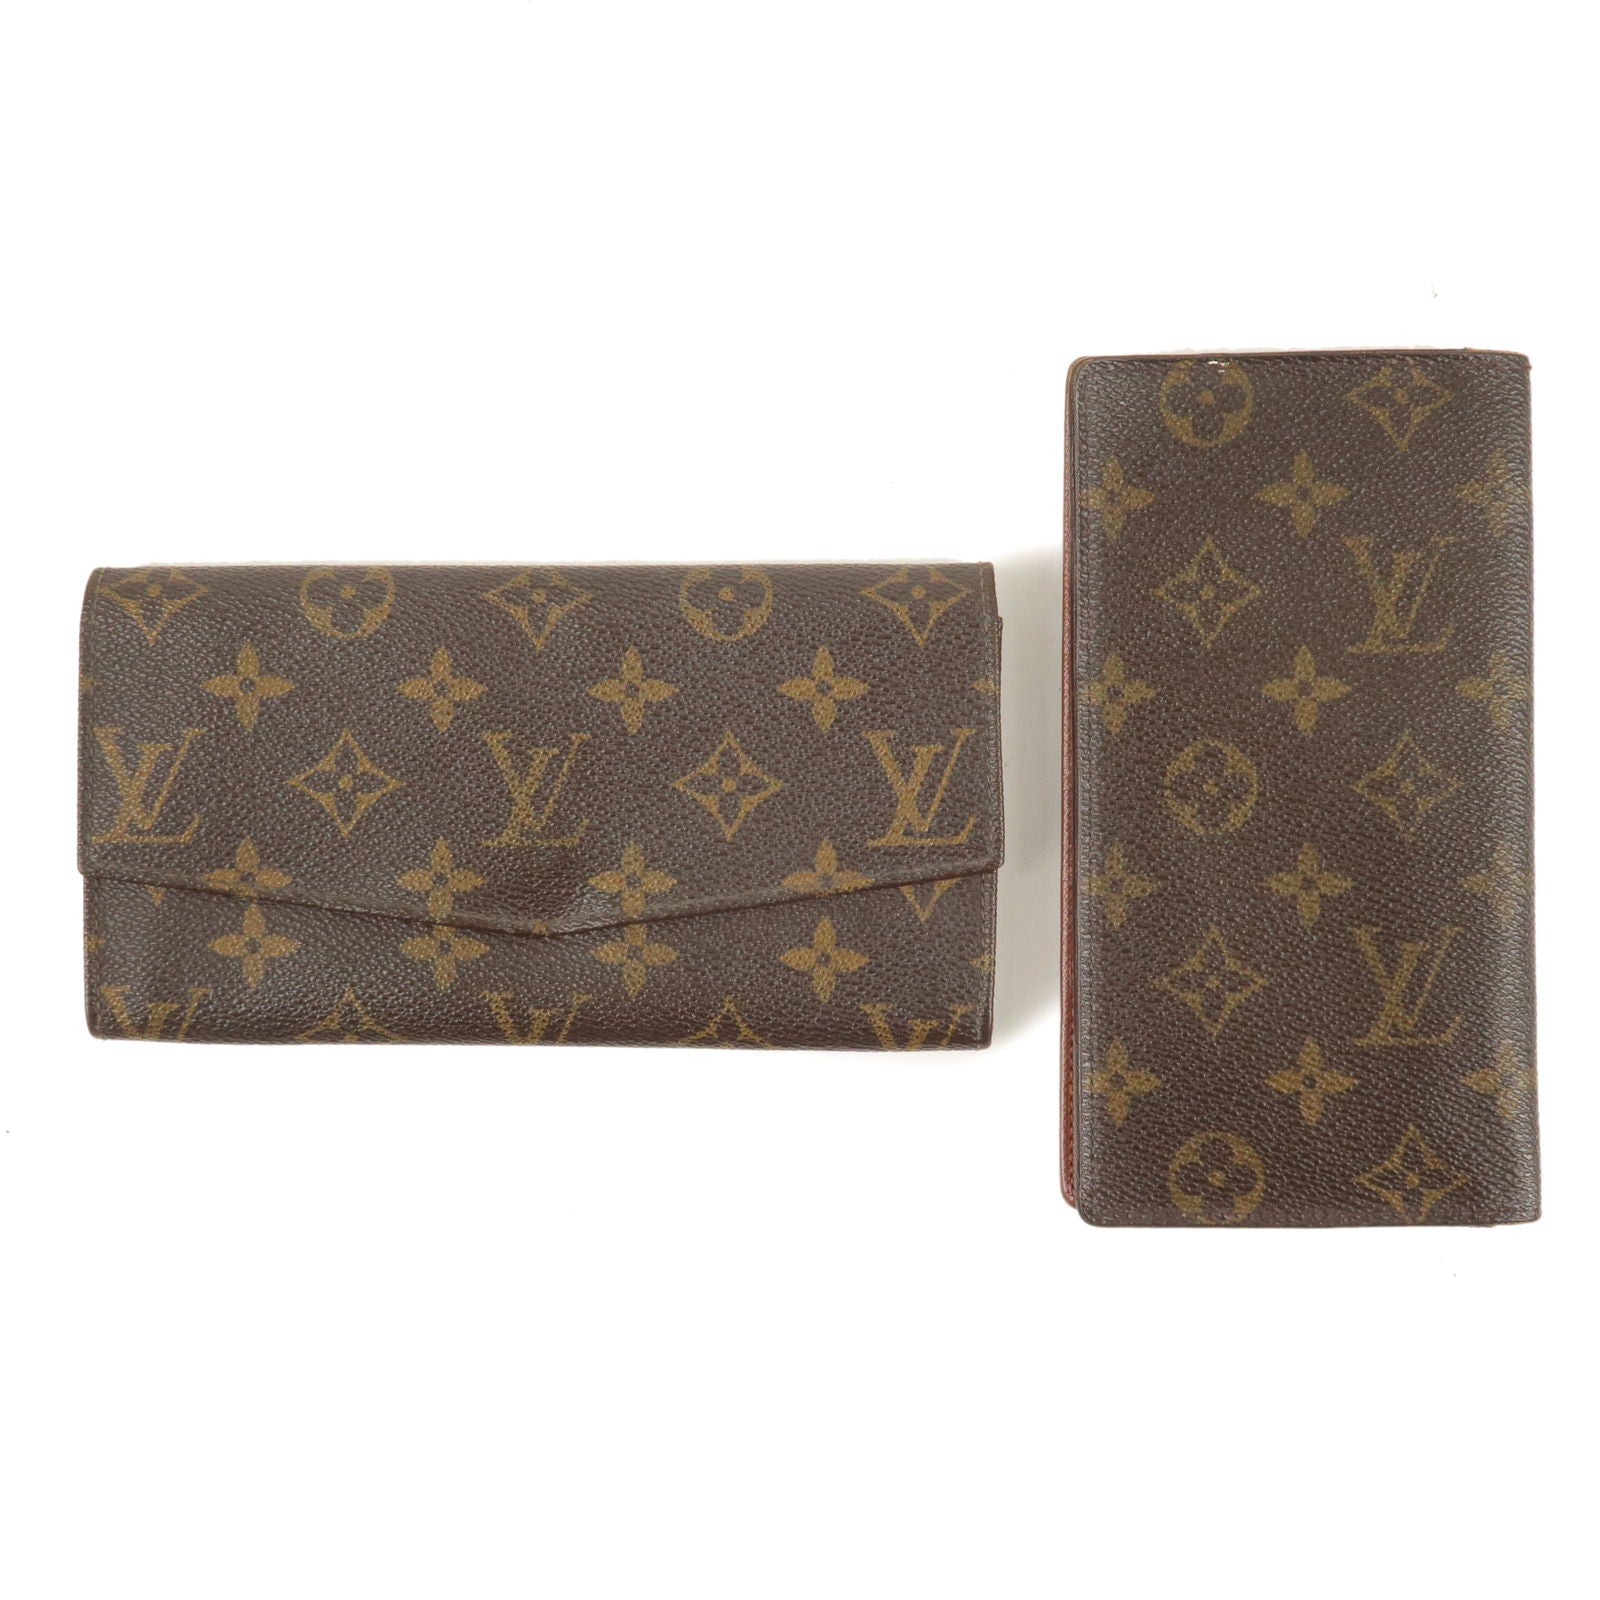 Louis Vuitton 6-Ring Key Case in Monogram. Love this - and can't